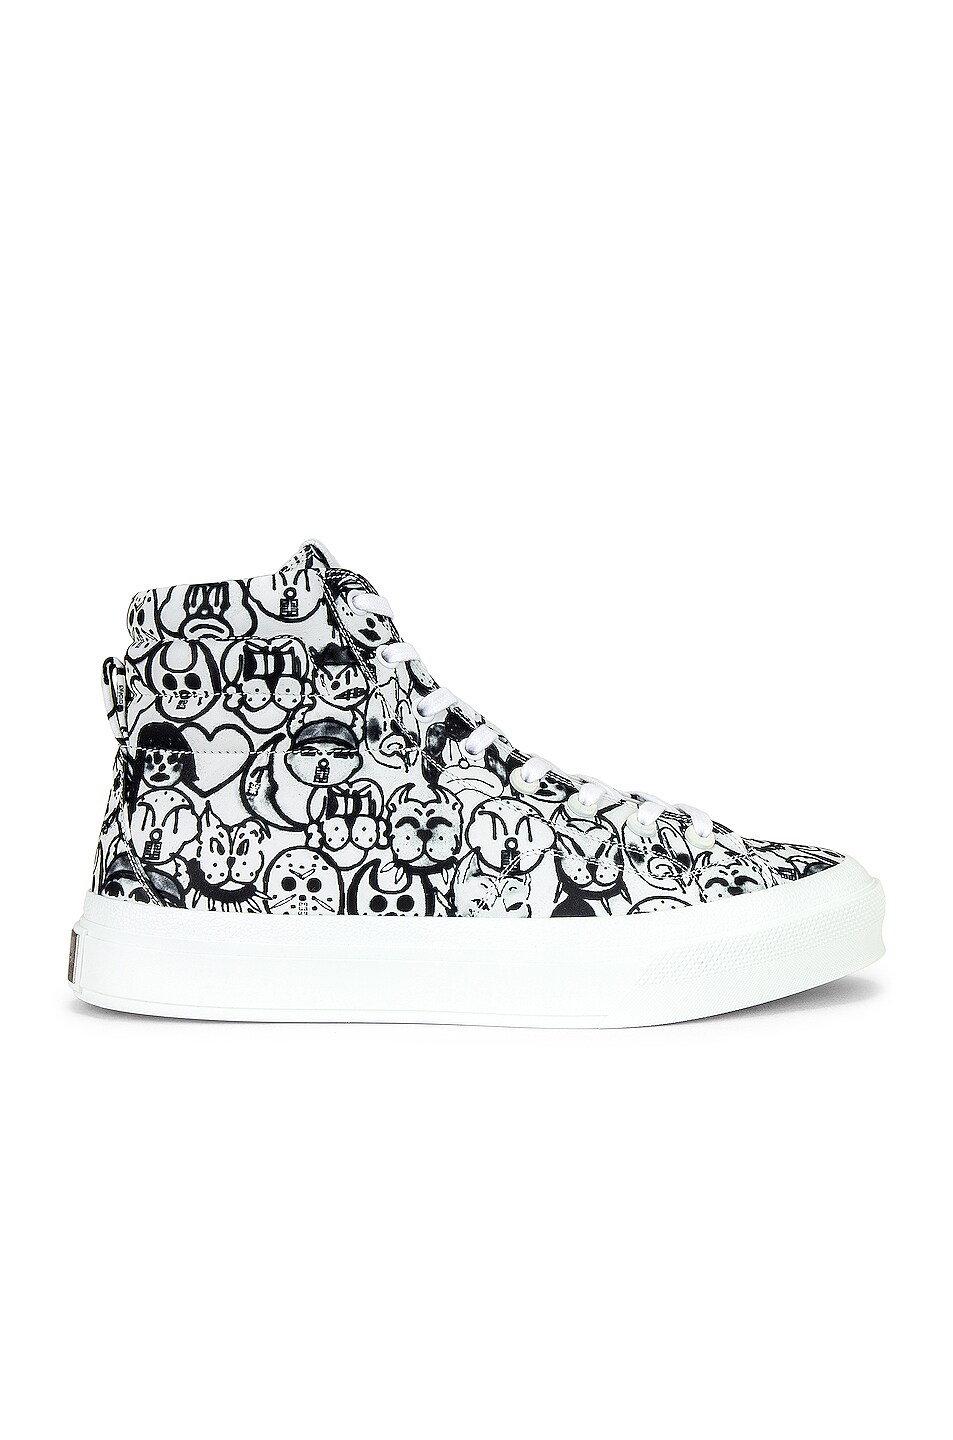 Image 1 of Givenchy City High Top Sneaker in White & Black